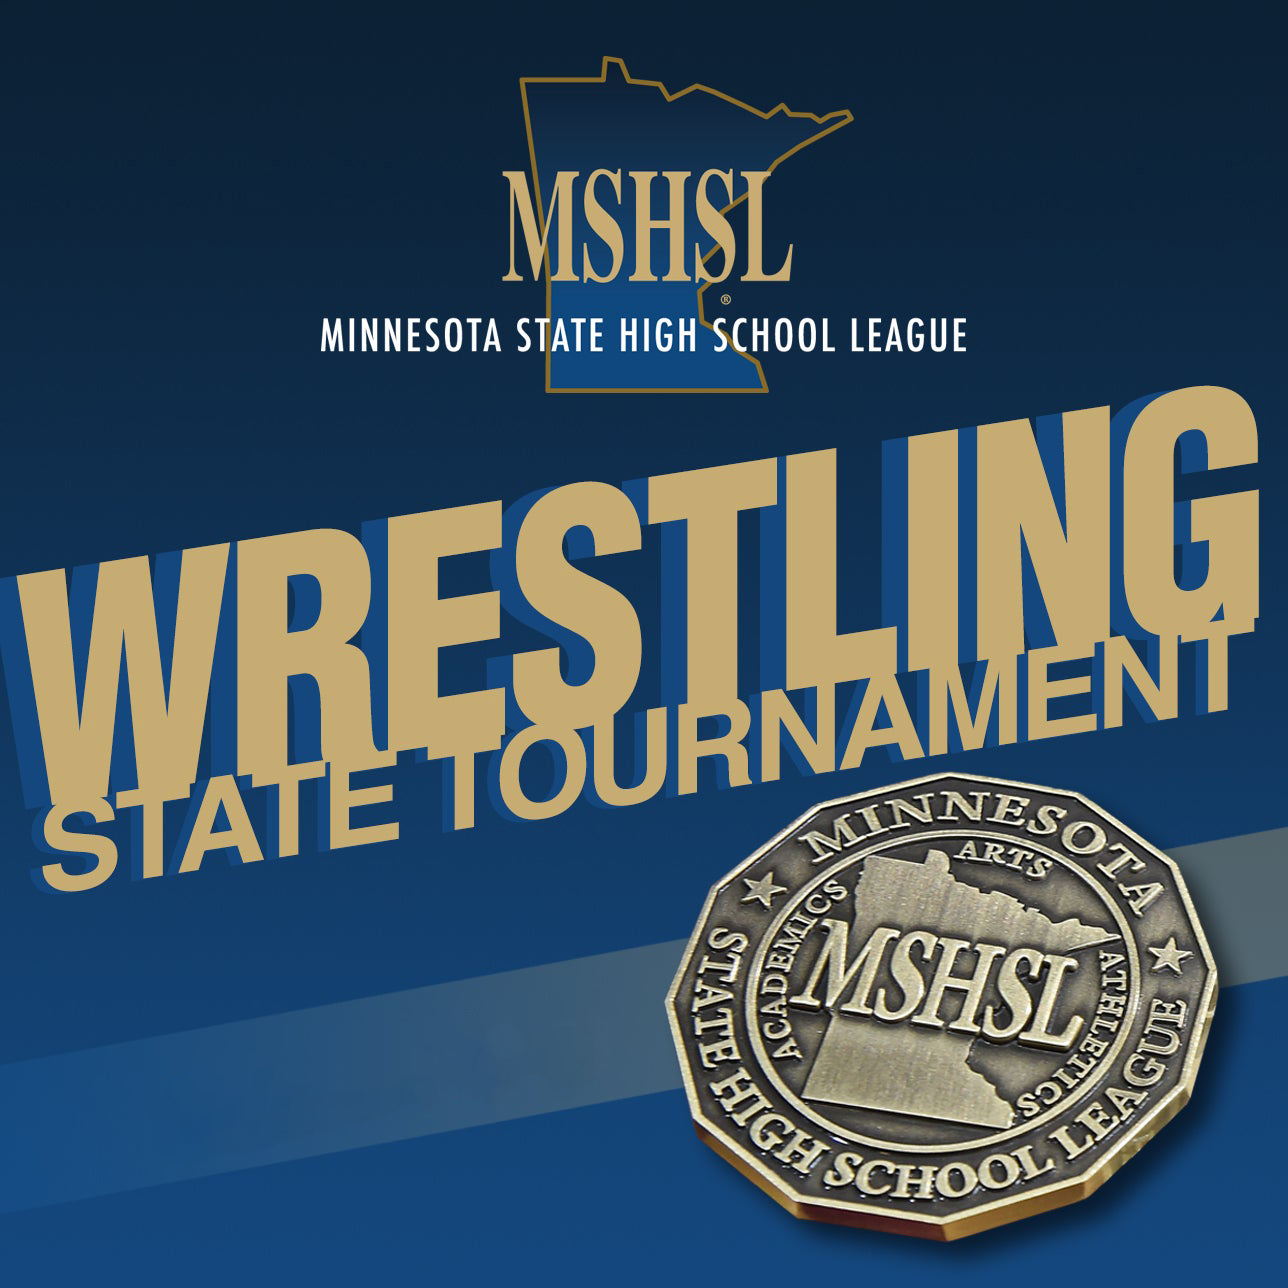 MSHSL State Wrestling Tournament - All Tournament Pass at Xcel Energy Center